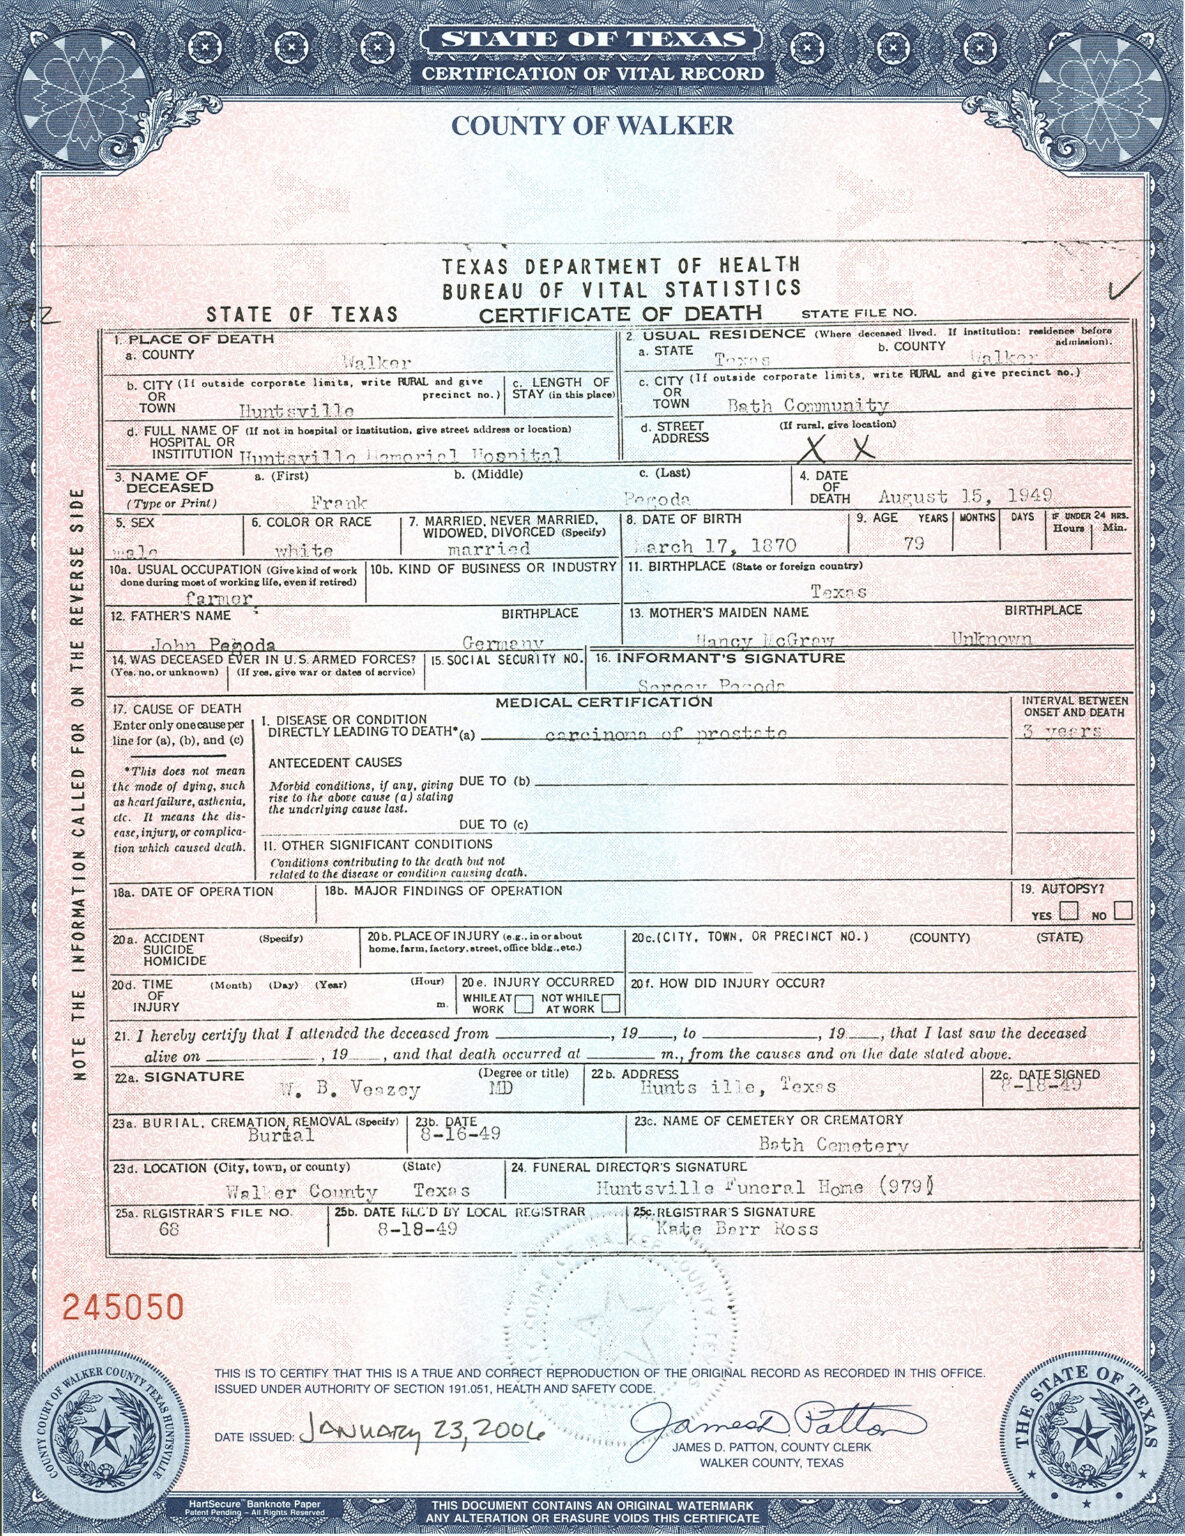 maryland division of vital records birth certificate